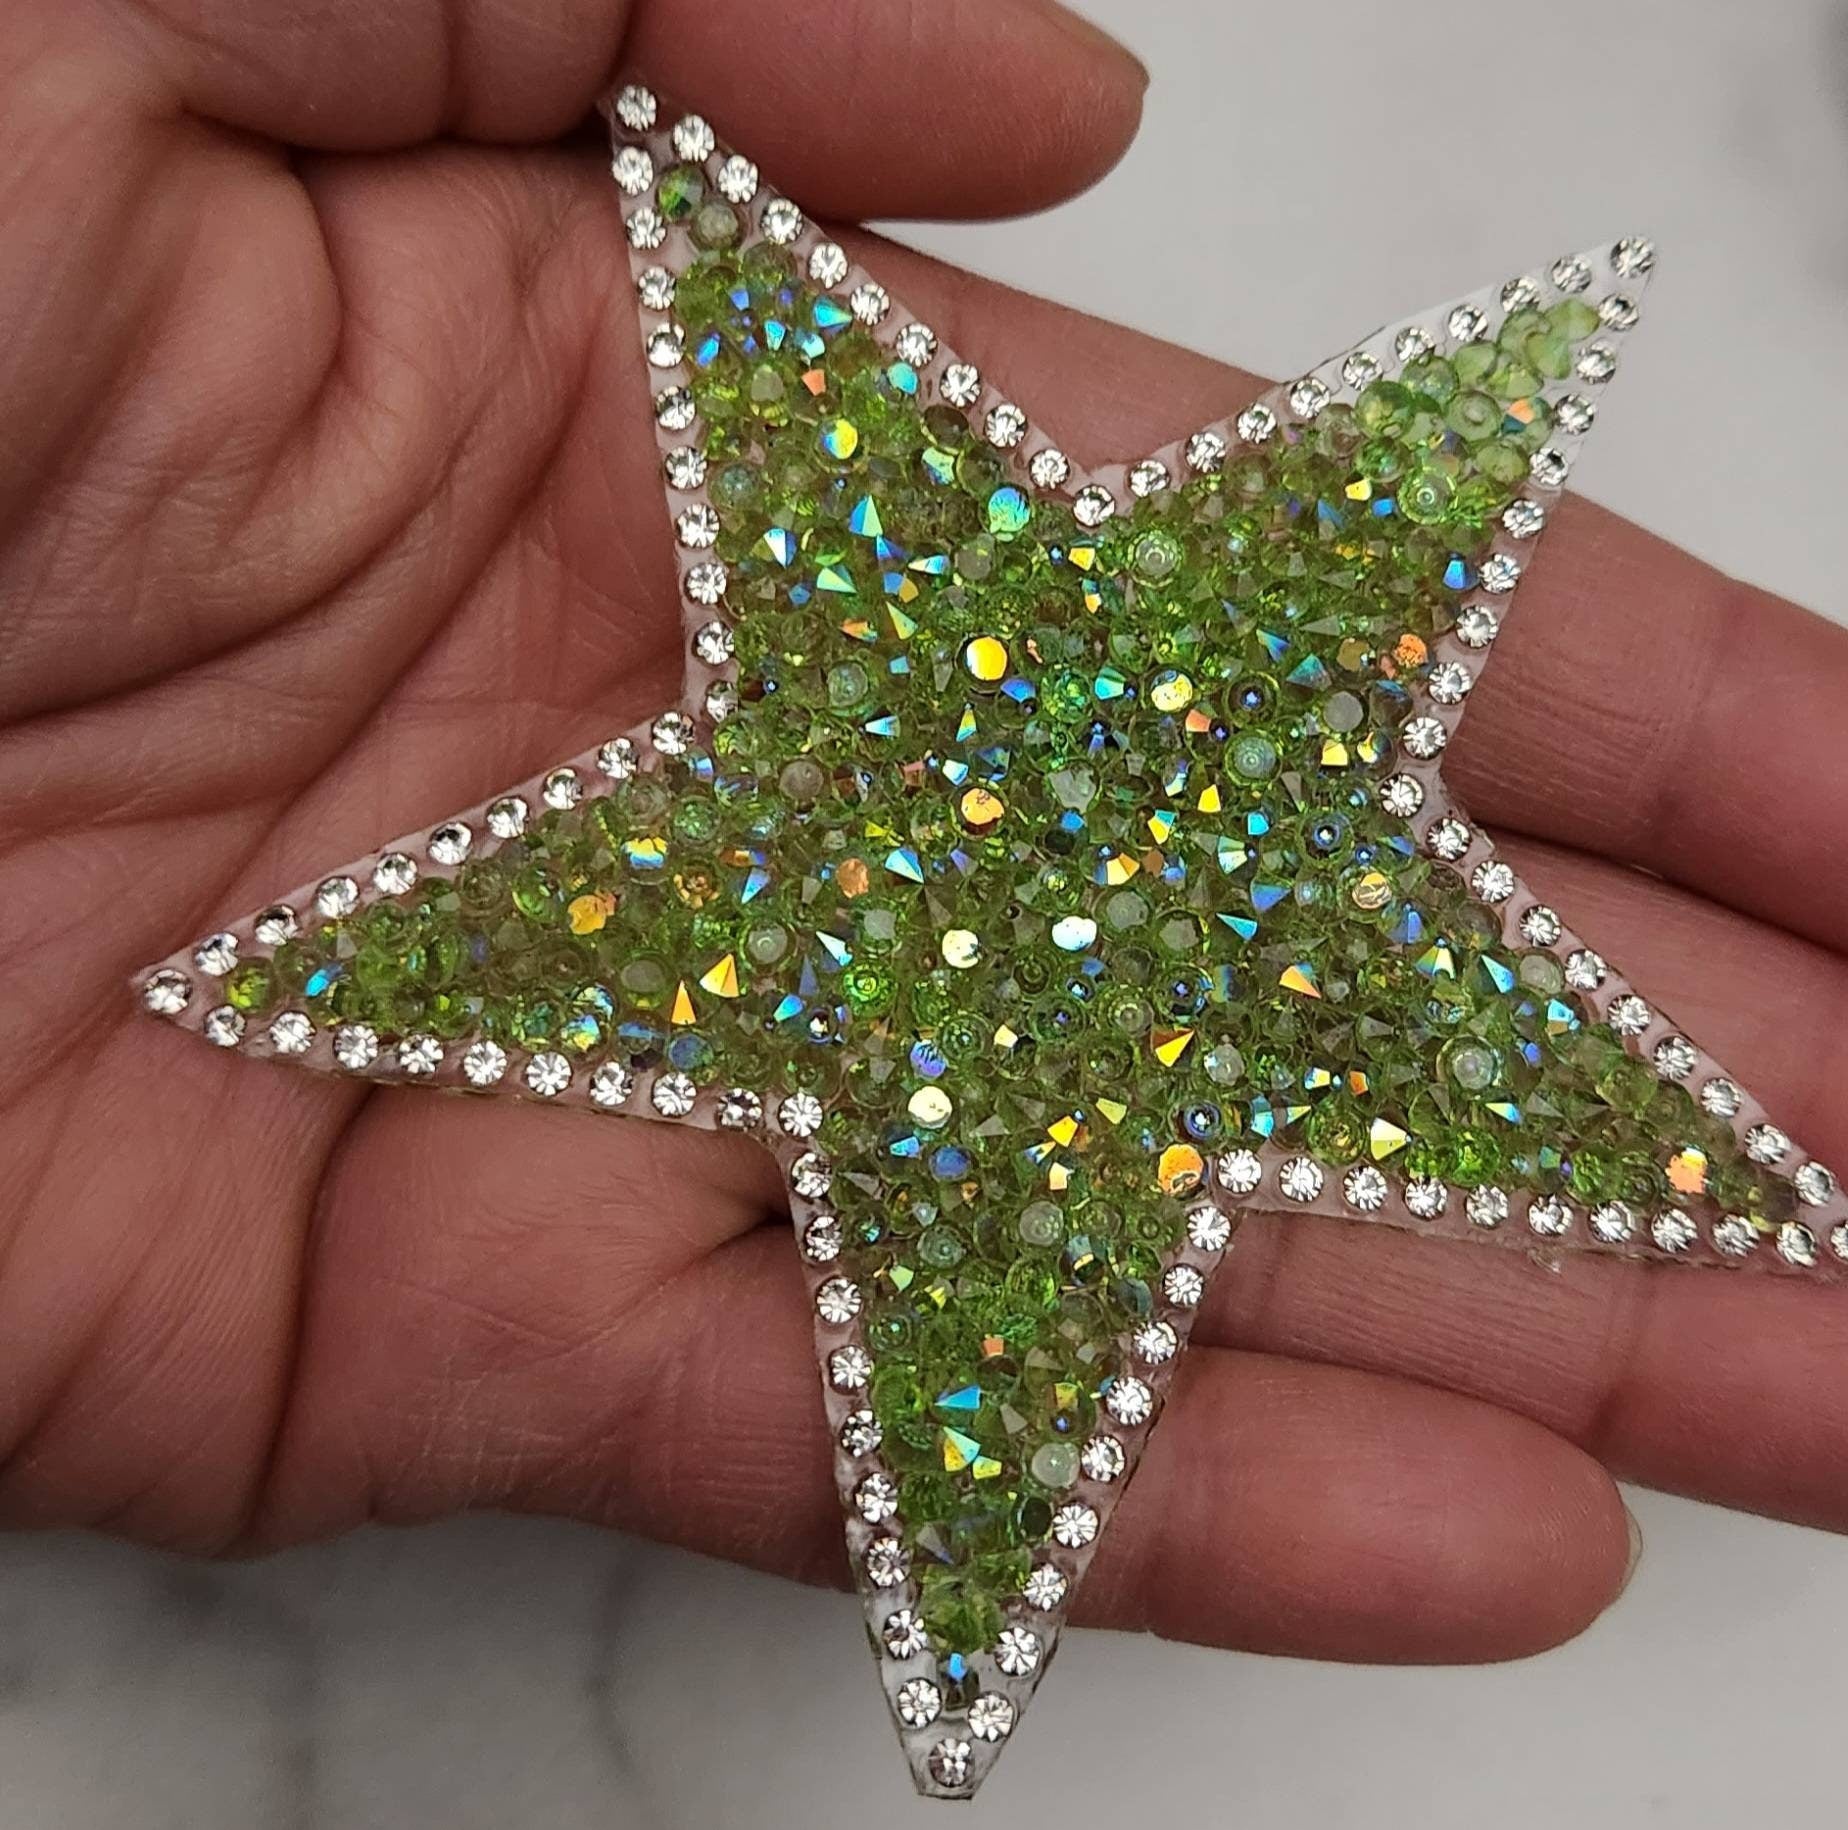 32 Pieces Star Patches Iron On Star Appliques Rhinestone Adhesive Star Iron  On Patches Embroidered Star Patches Bling Rhinestone Appliques Embellishme